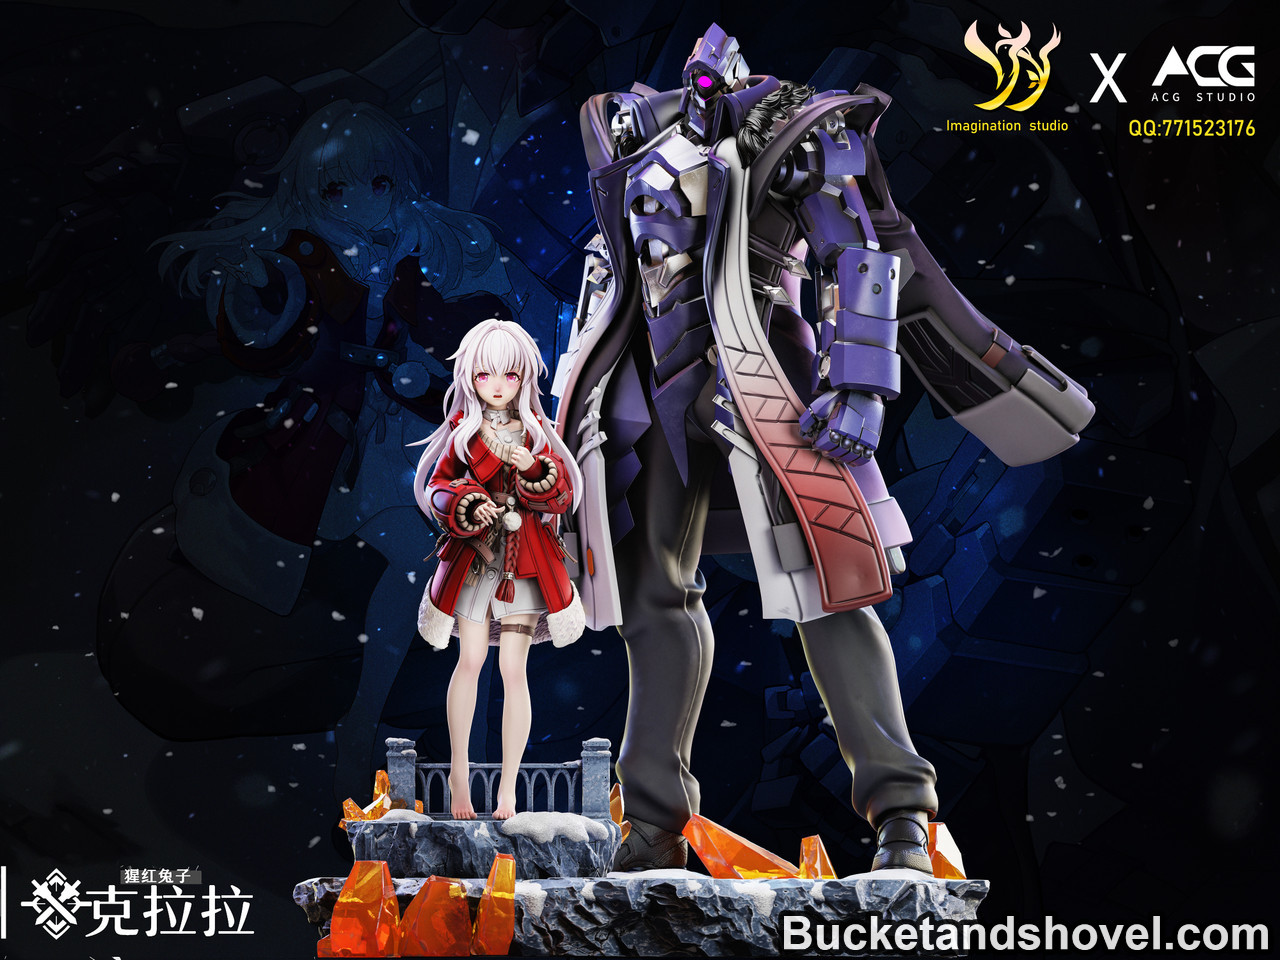 1/6 Scale Blank Anime Sculpture, with Dust Base, Sugar Shapers, Mr casting  block reviews